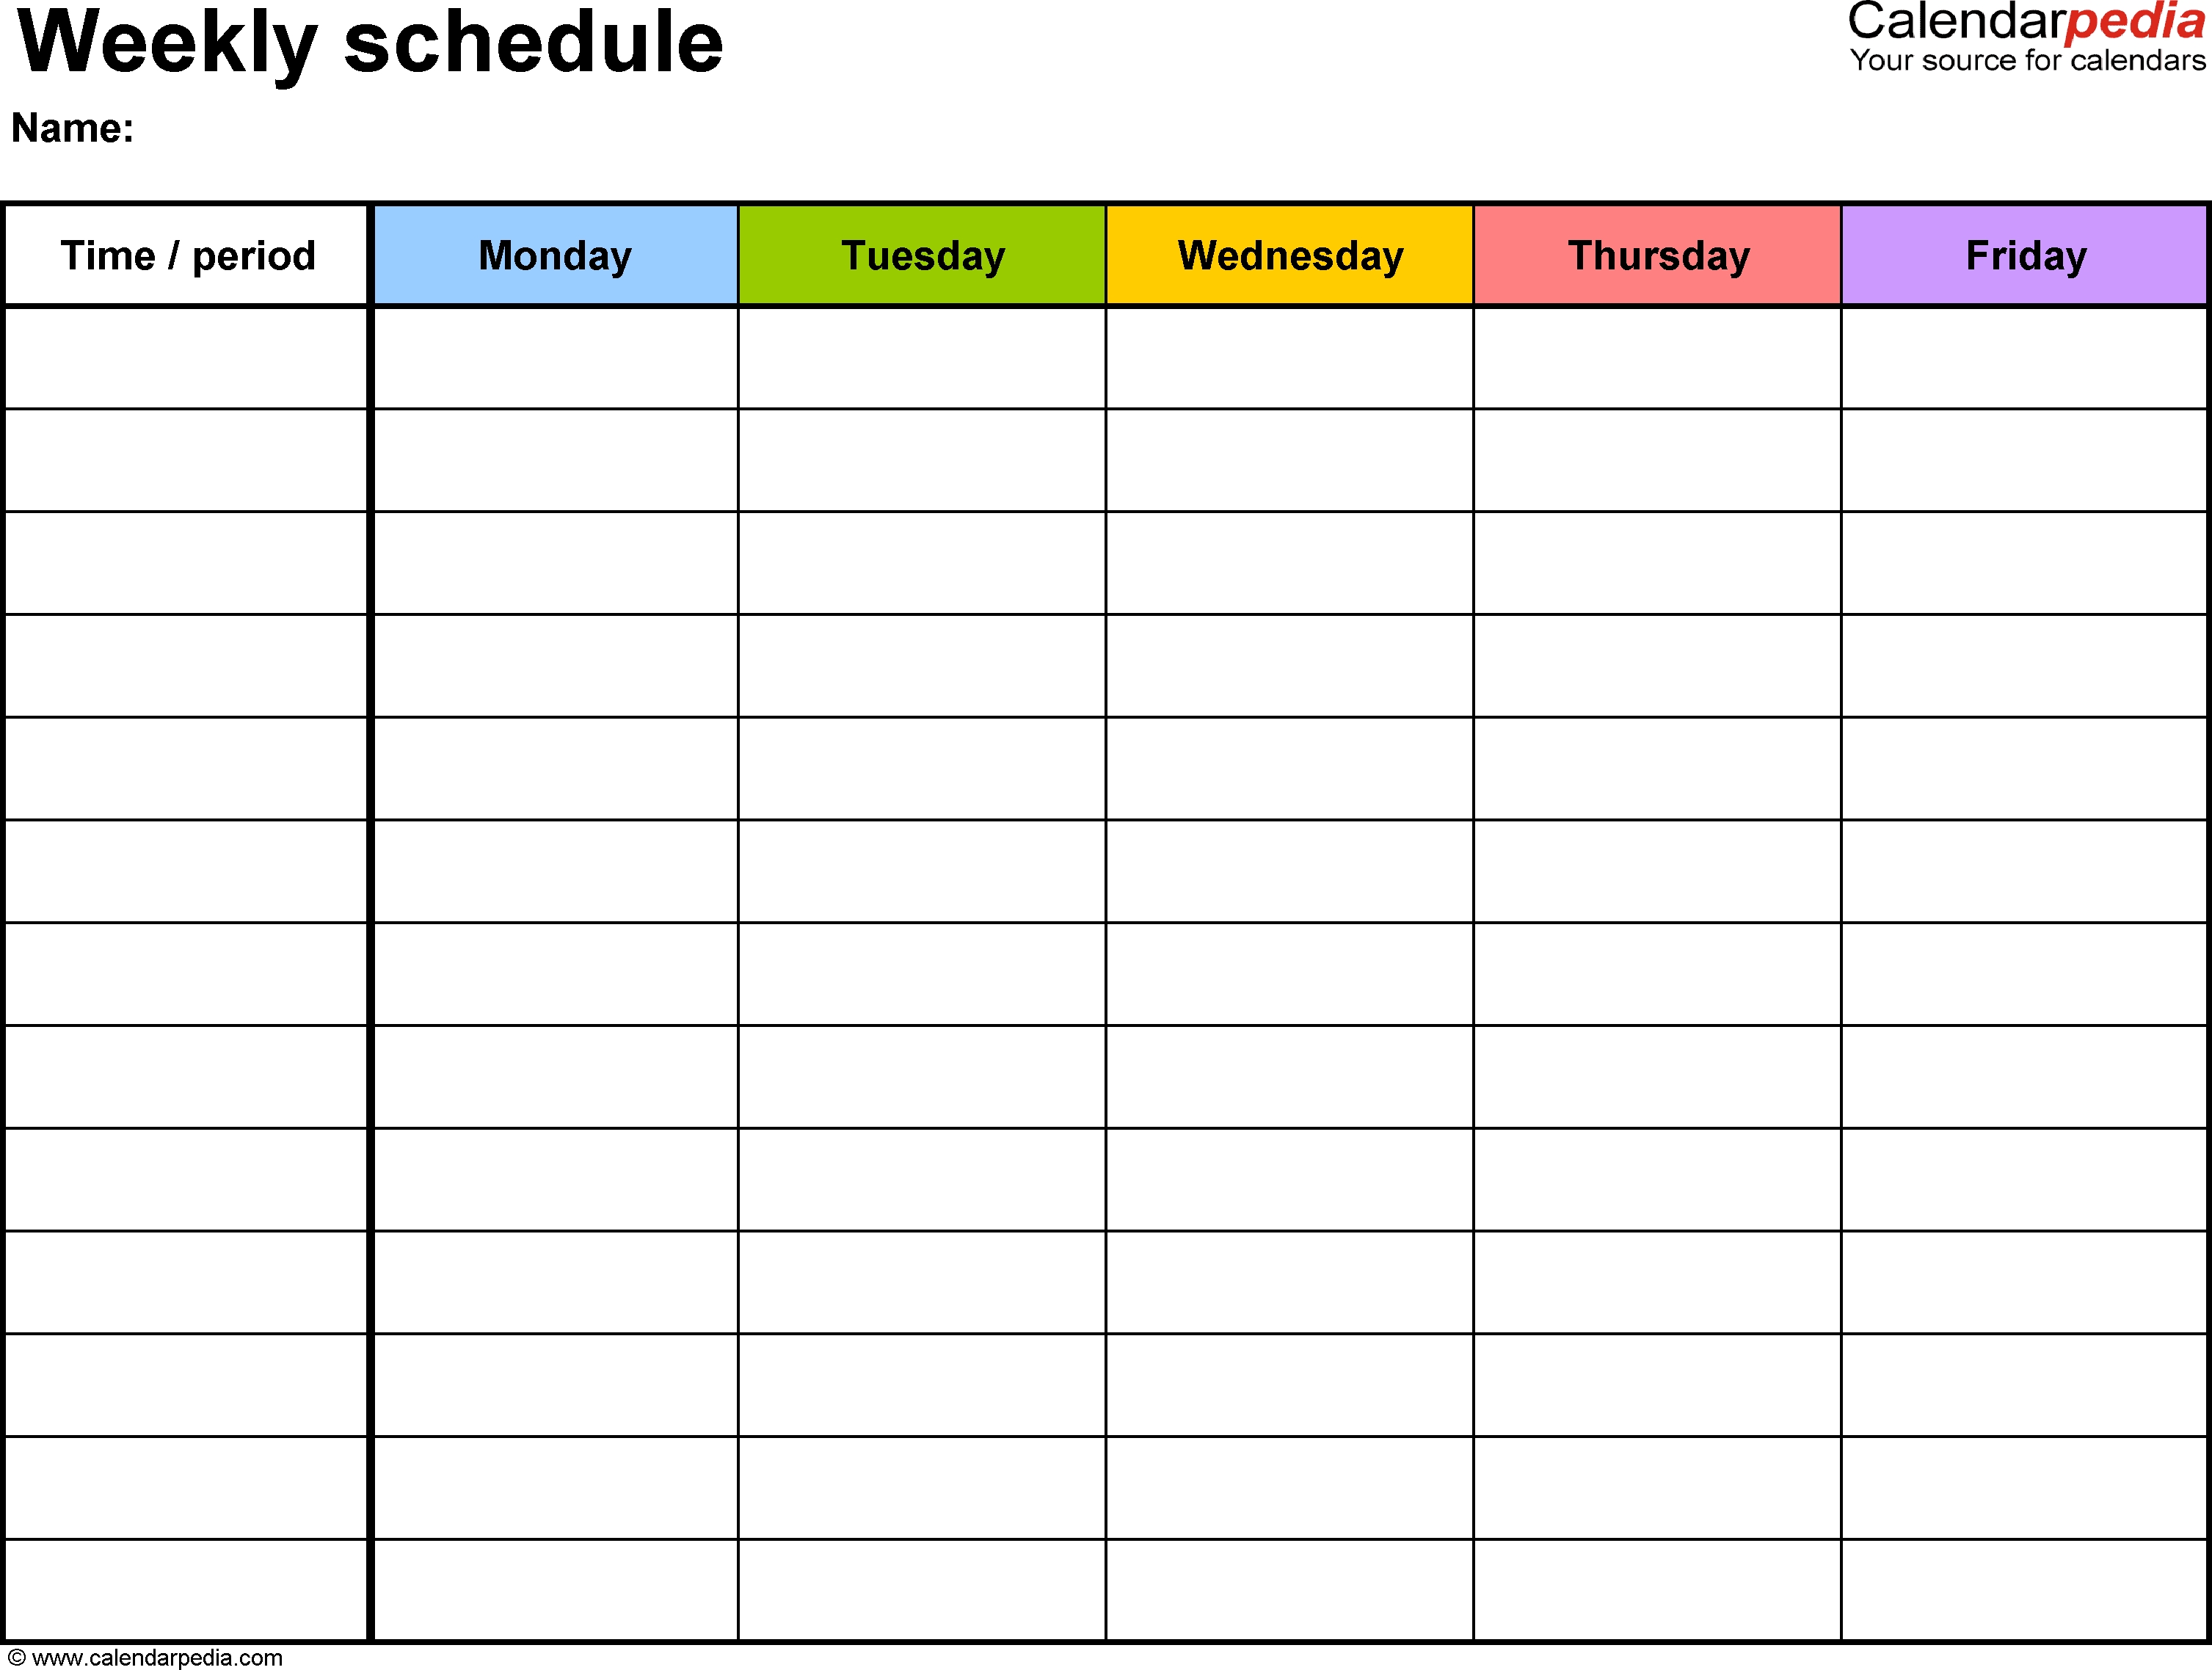 Free Weekly Schedule Templates For Excel - 18 Templates Monthly Calendar Sign Up Sheet Template